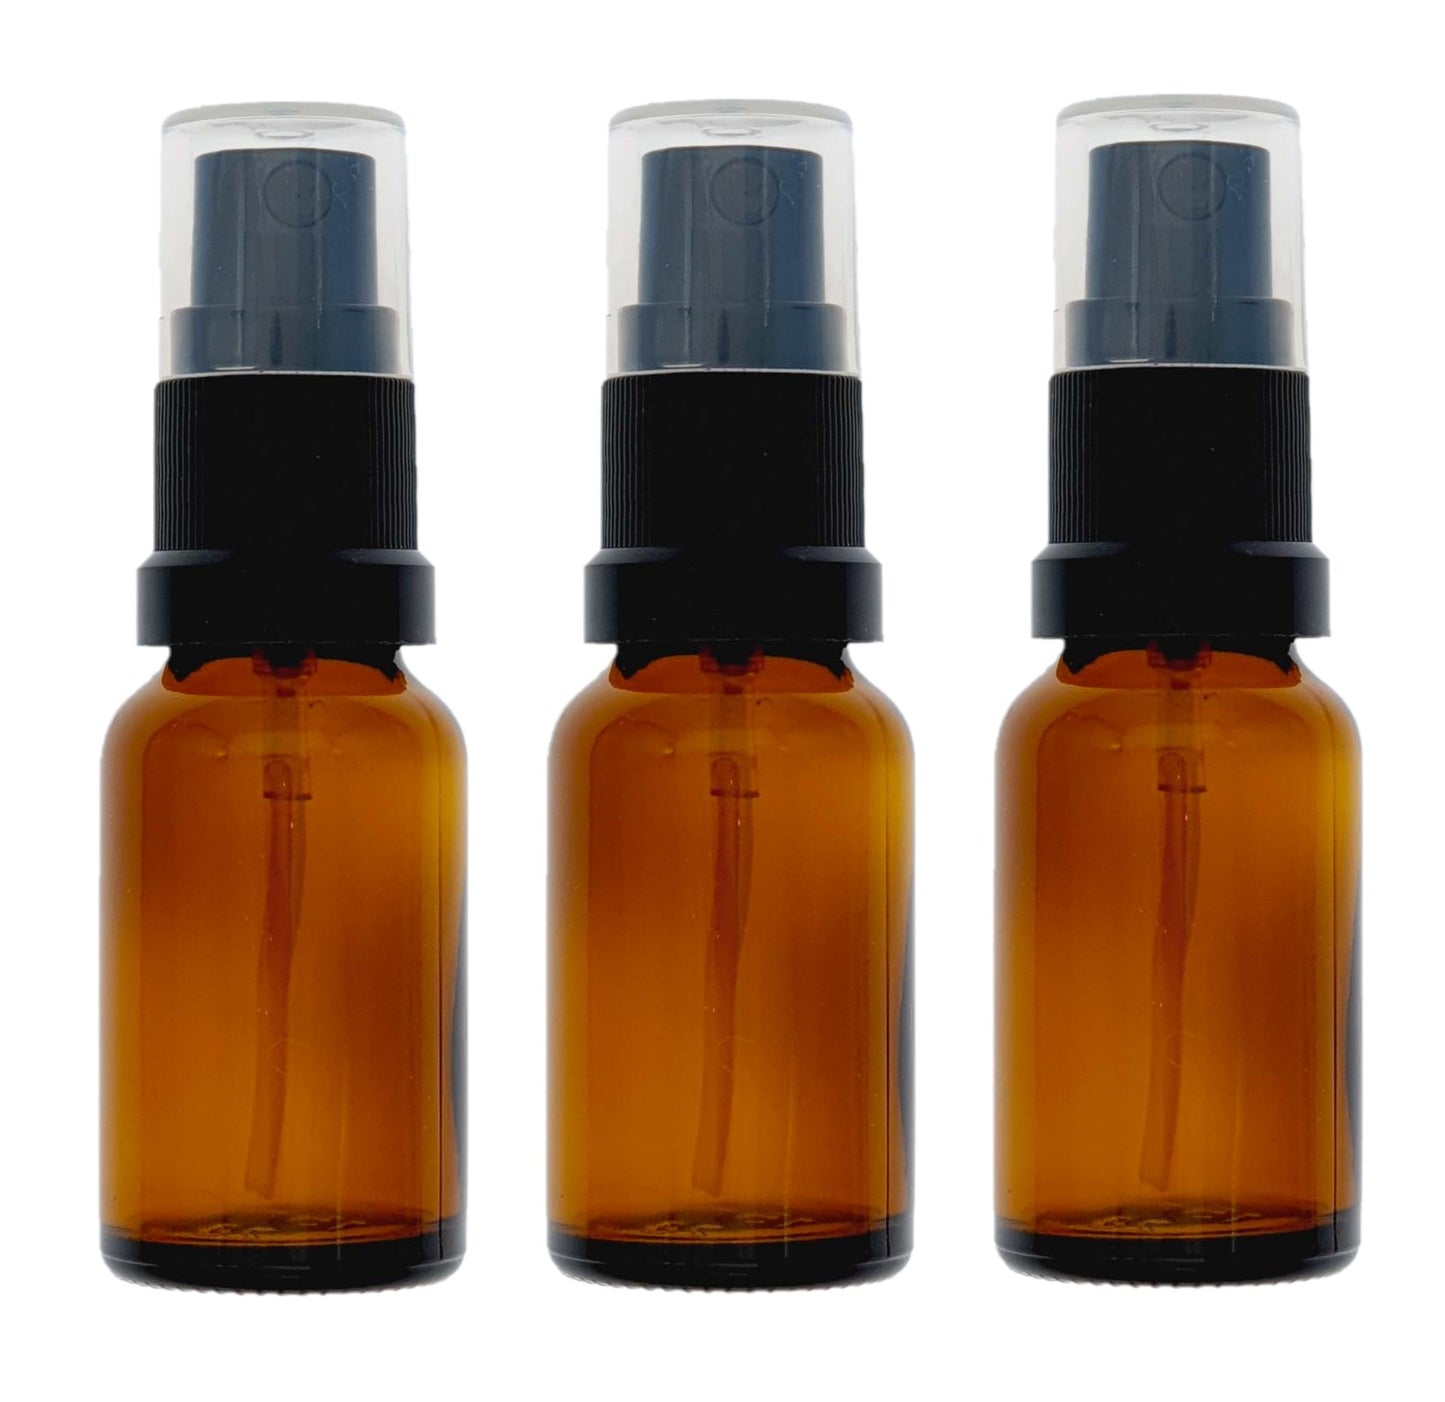 15ml Amber Glass Bottles with Black Atomiser Spray and Clear Overcap